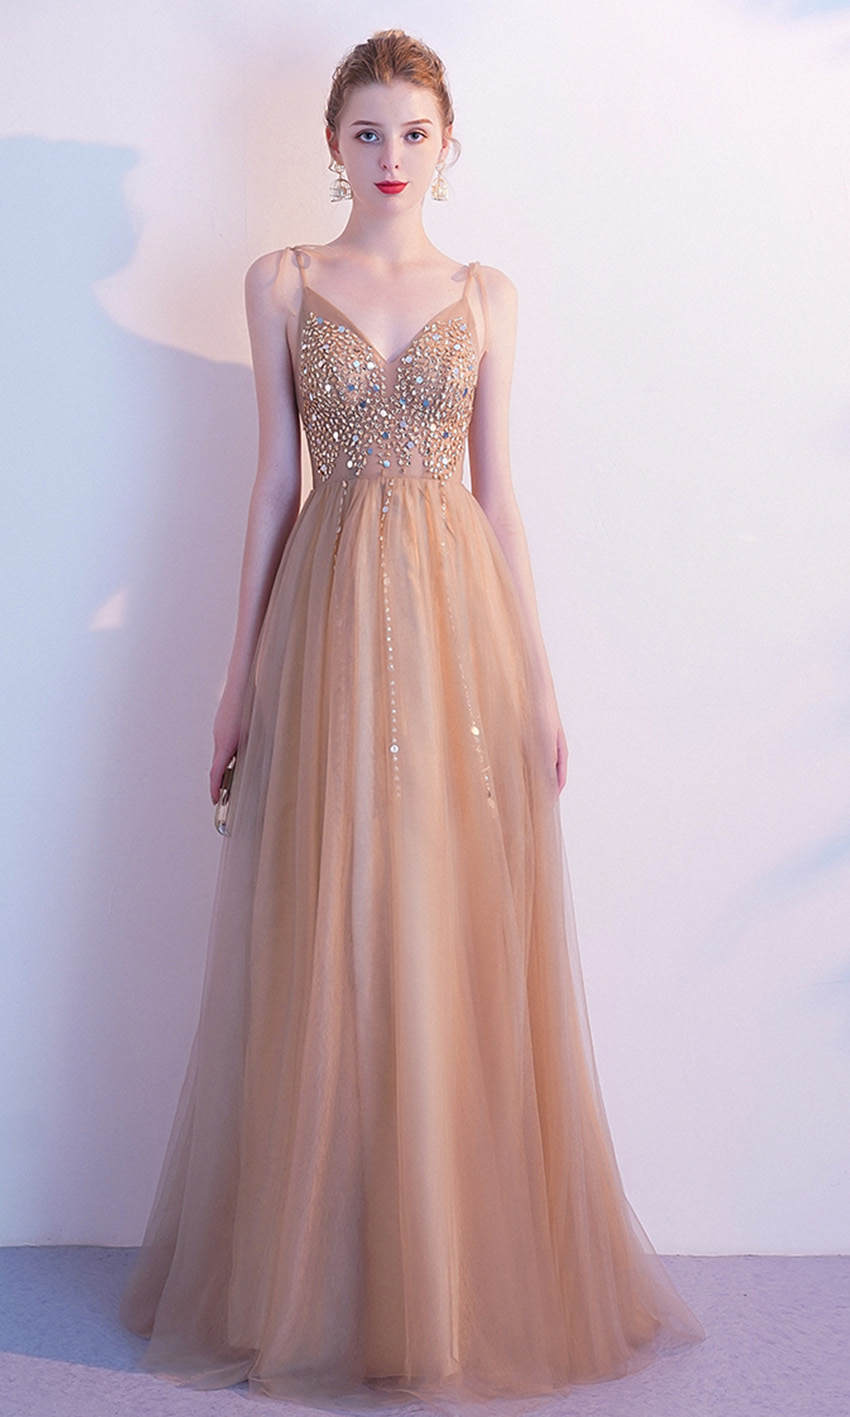 Embellished Gold Champagne Ball Dresses with Knotted Up Spaghetti Straps P583